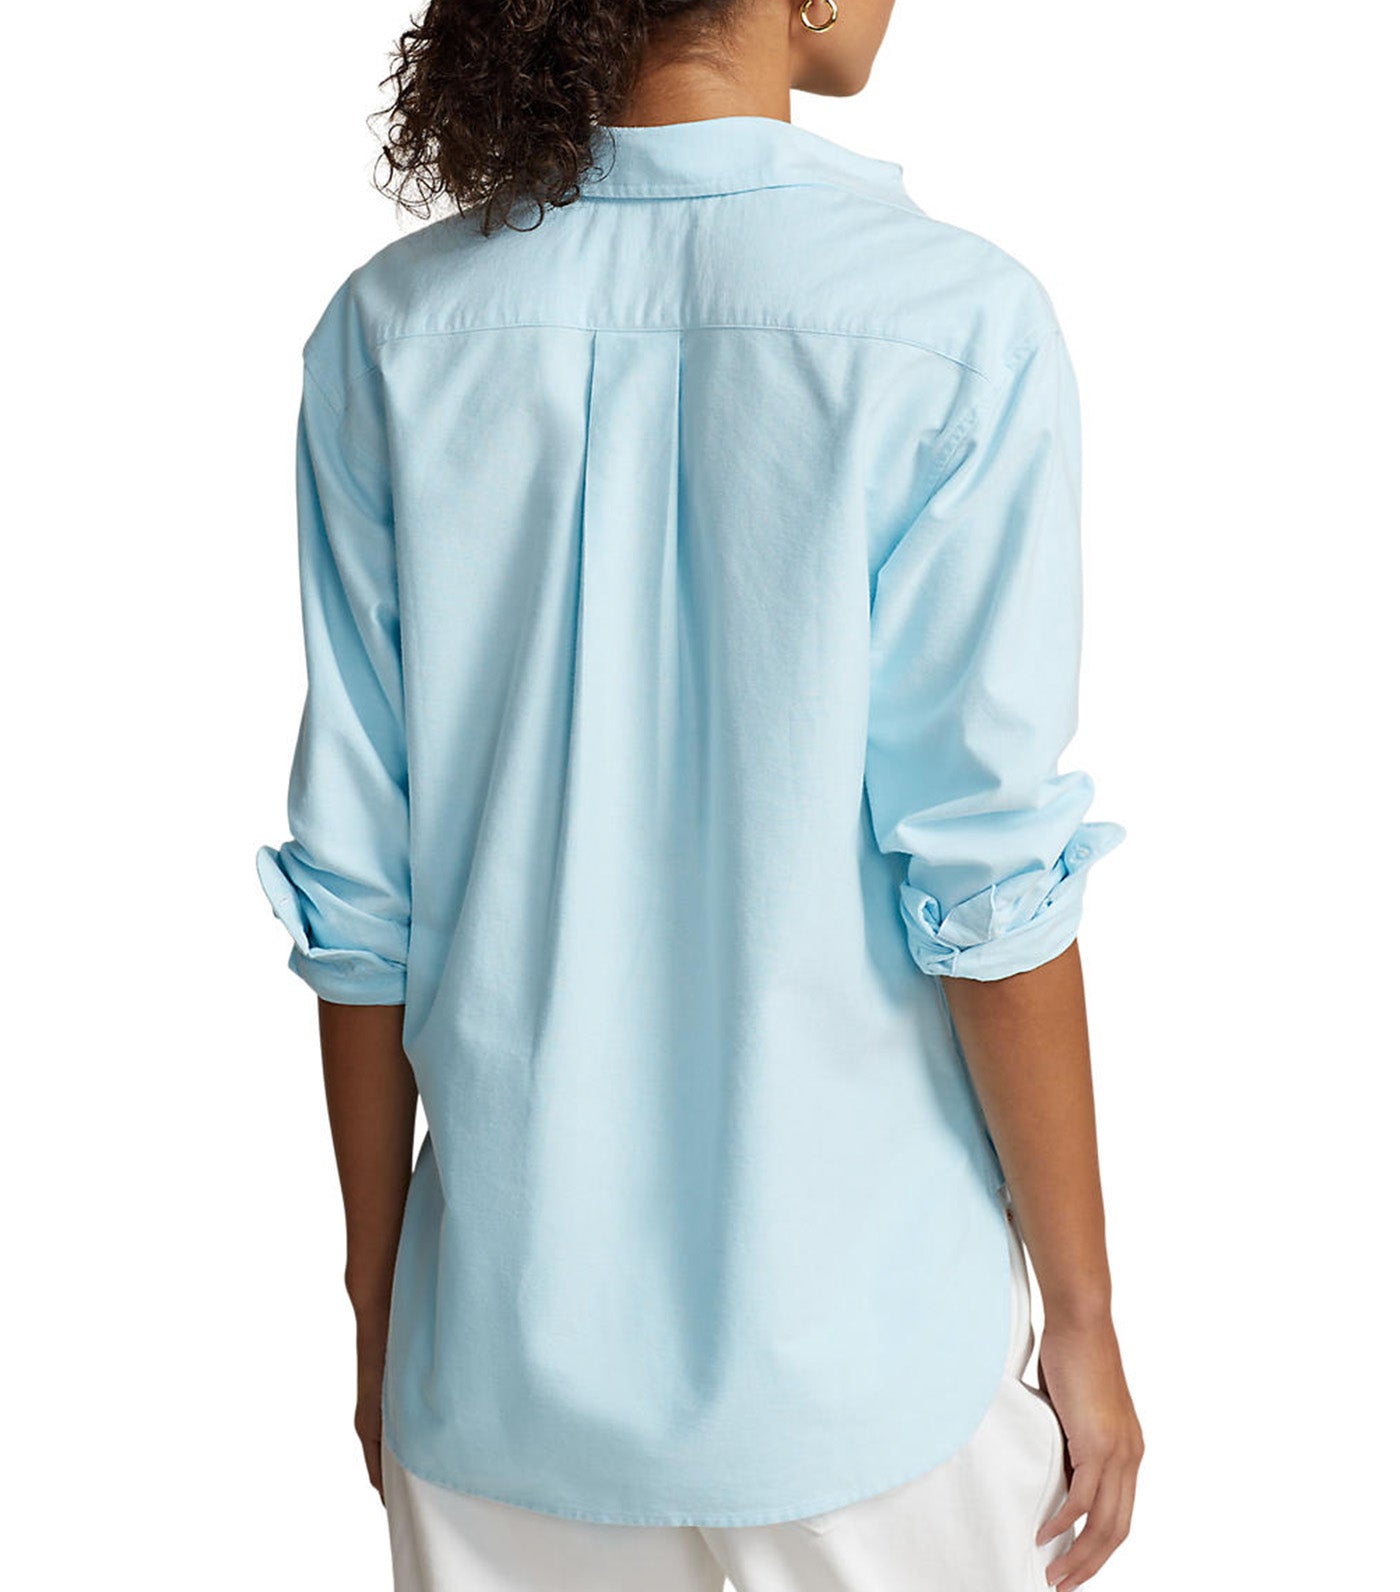 Women's Relaxed Fit Cotton Oxford Shirt Acadia Blue